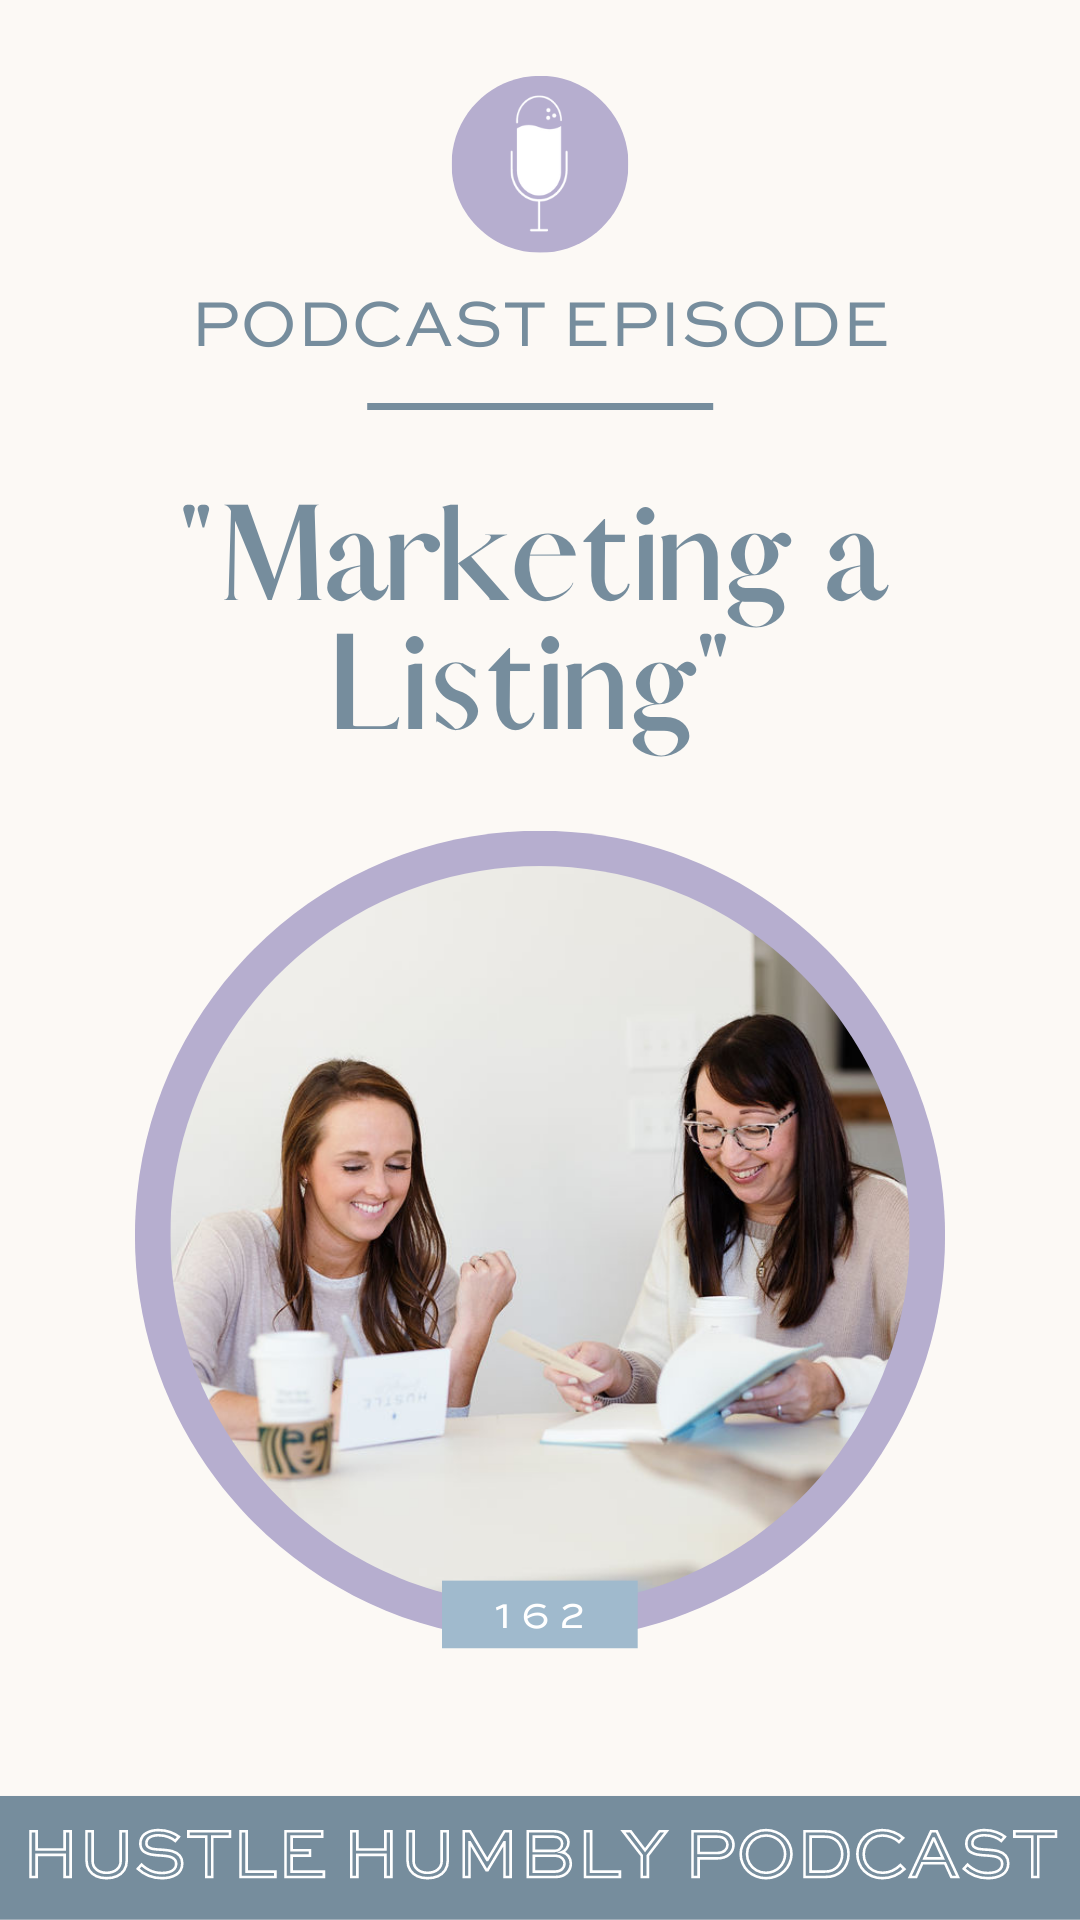 Hustle Humbly Podcast Episode 162: Marketing a Listing